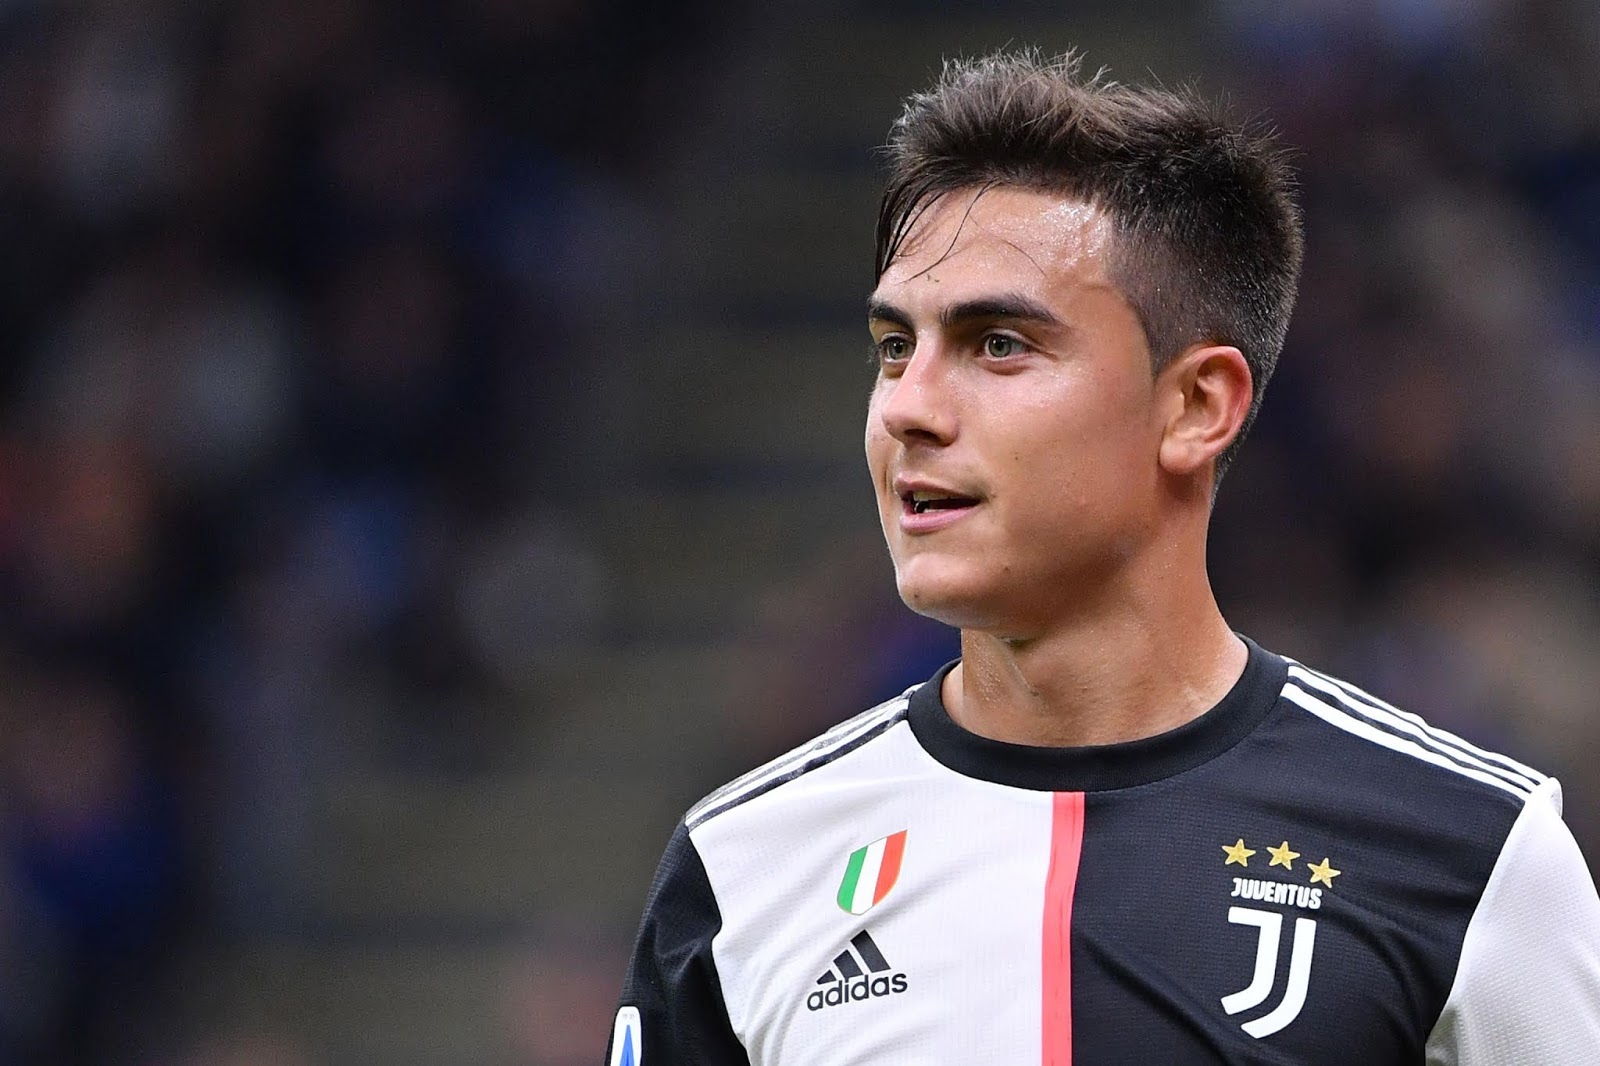 Transfer News: Chelsea target Paulo Dybala is closing in on a move to Inter Milan.